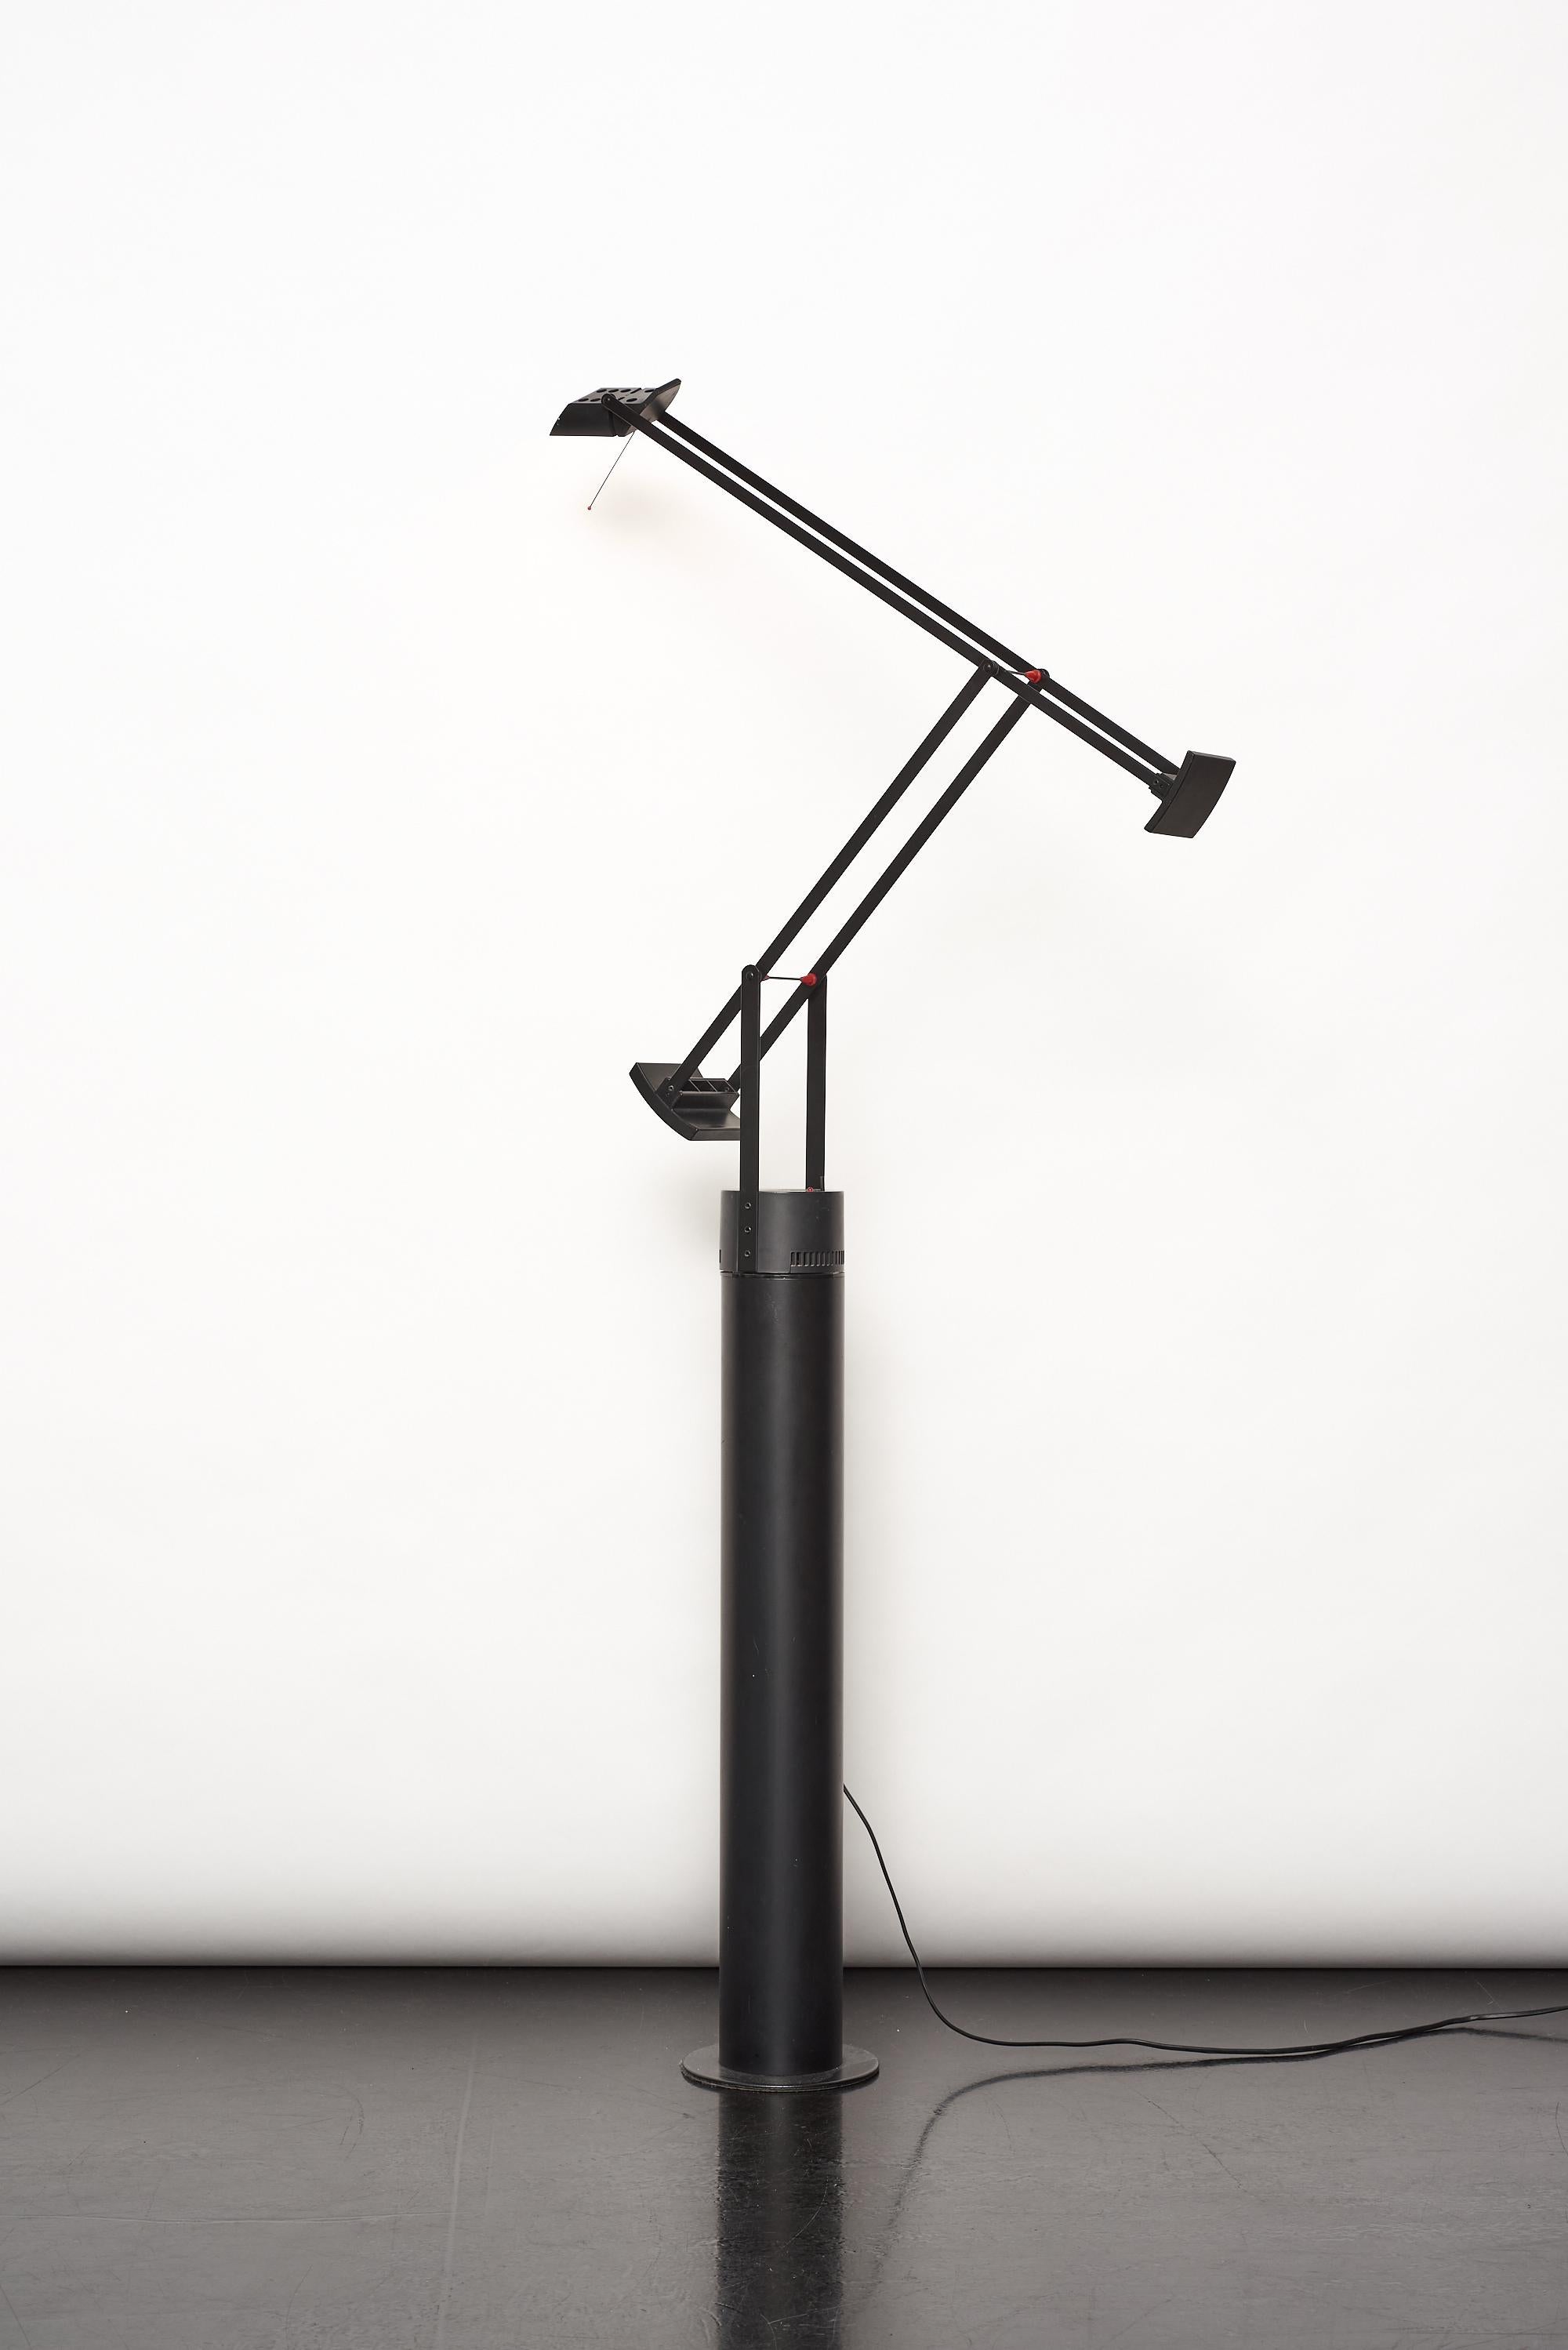 Tizio 35 terra floor lamp designed by richard sapper for artemide, 1971. The tizio lamp was revolutionary! Black, angled, minimalist, and mysterious, the lamp achieved its real commercial success in the early 1980s, when its sleek look met the wall